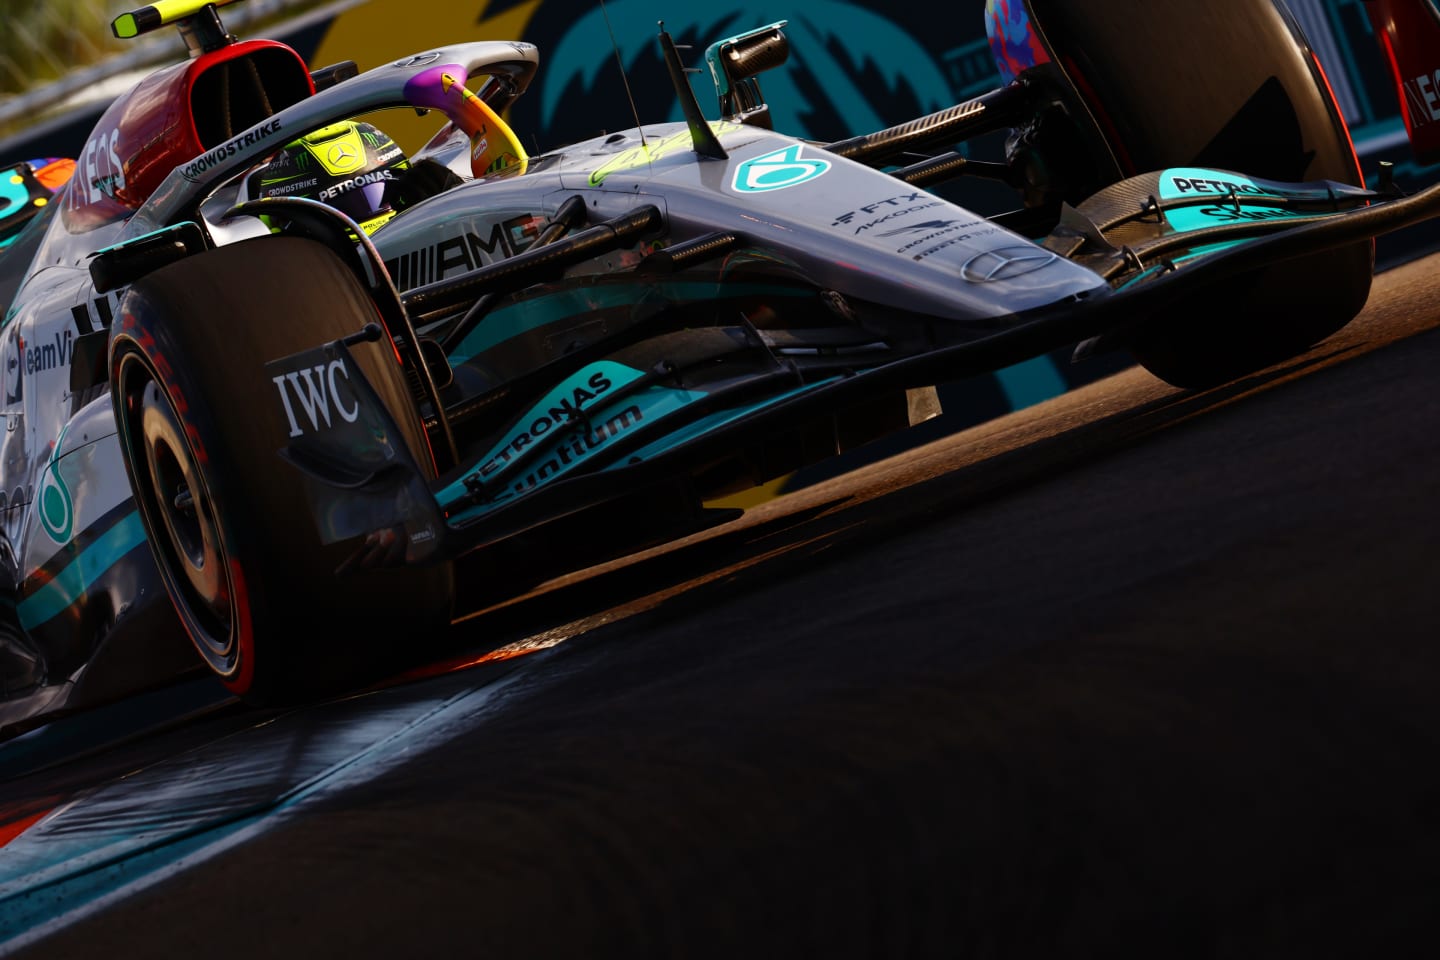 MIAMI, FLORIDA - MAY 06: Lewis Hamilton of Great Britain driving the (44) Mercedes AMG Petronas F1 Team W13 on track during practice ahead of the F1 Grand Prix of Miami at the Miami International Autodrome on May 06, 2022 in Miami, Florida. (Photo by Mark Thompson/Getty Images)